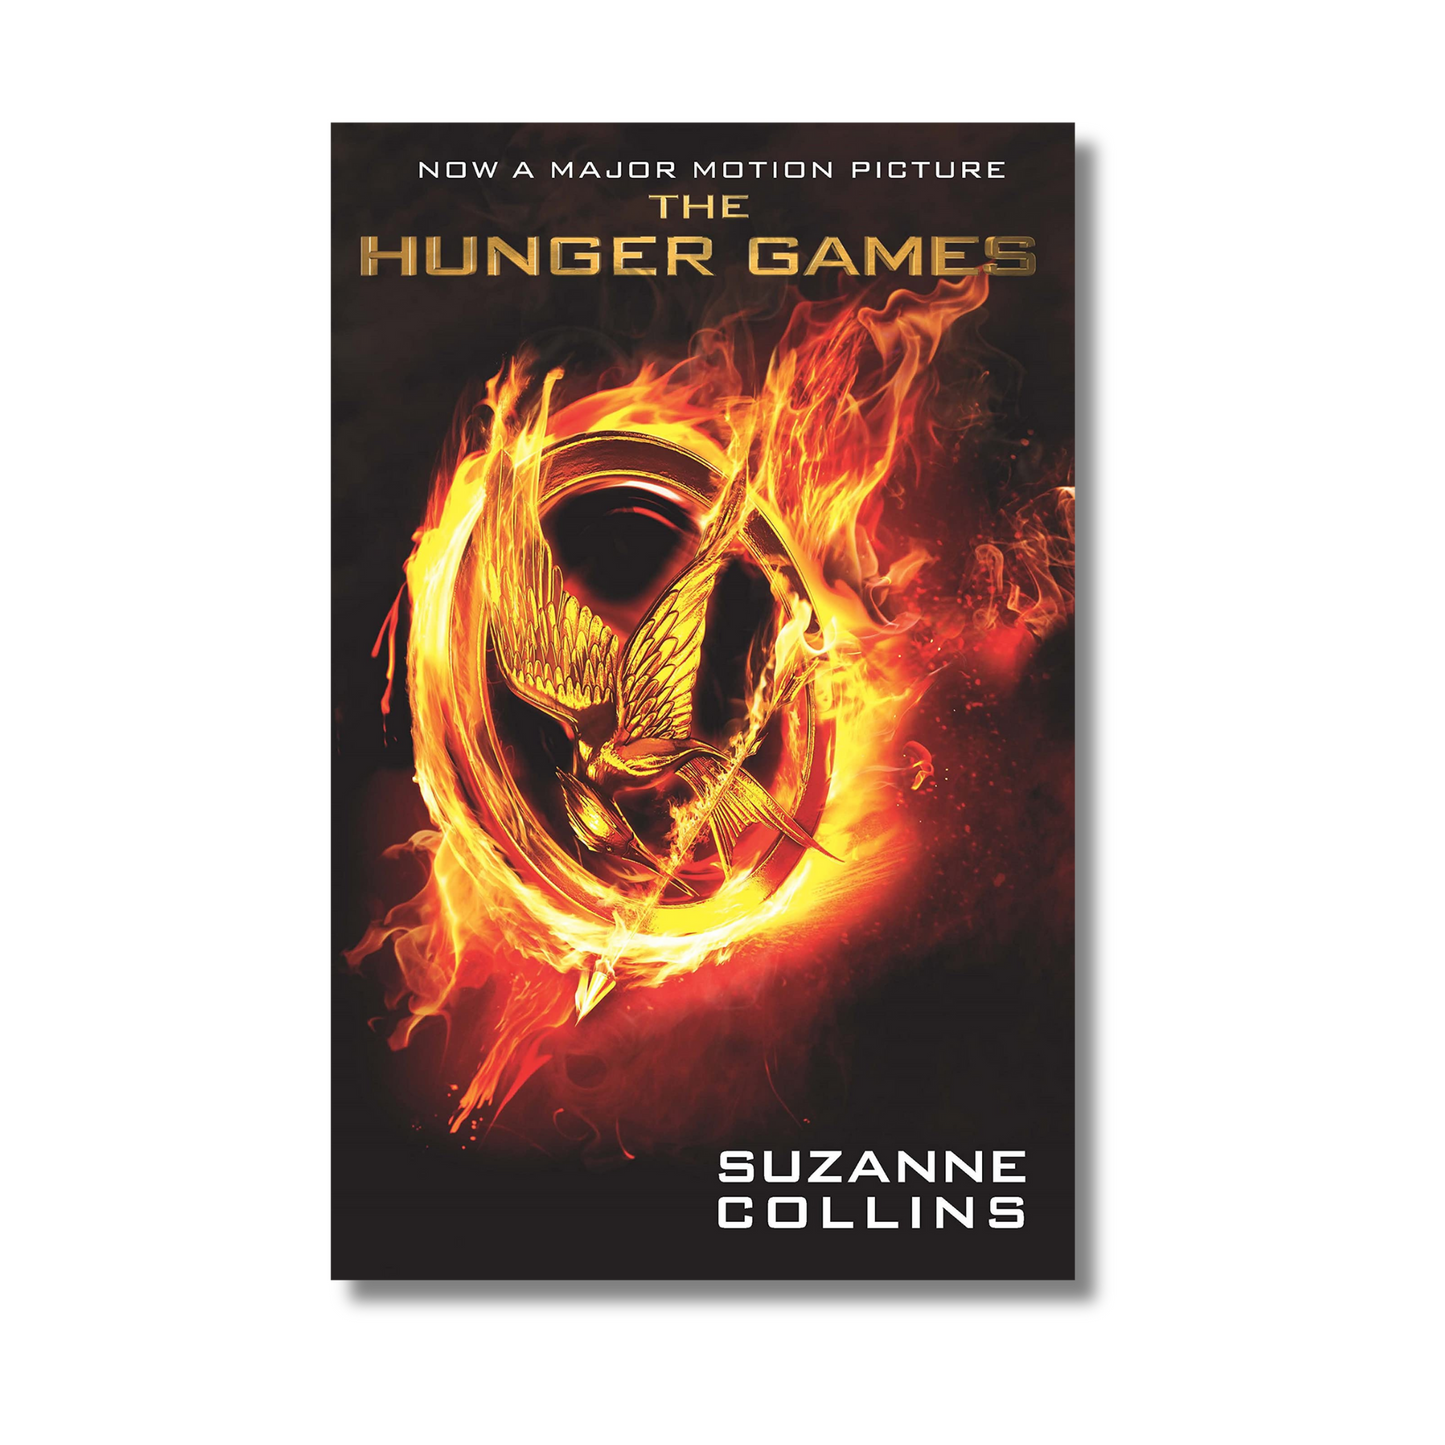 The Hunger Games By Suzanne Collins (Paperback)